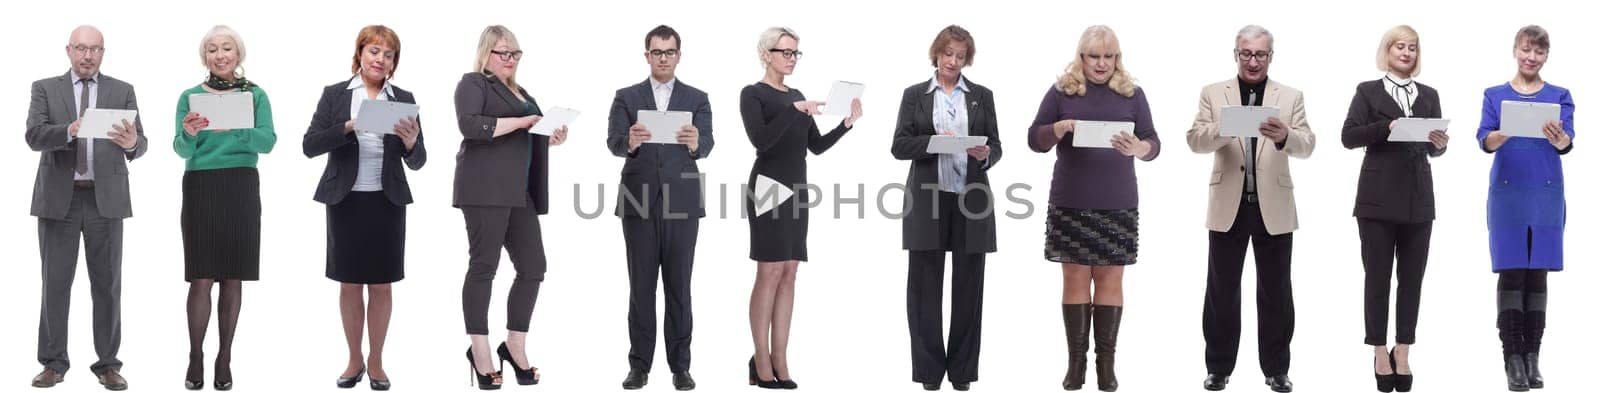 group of people holding tablet and looking into it by asdf